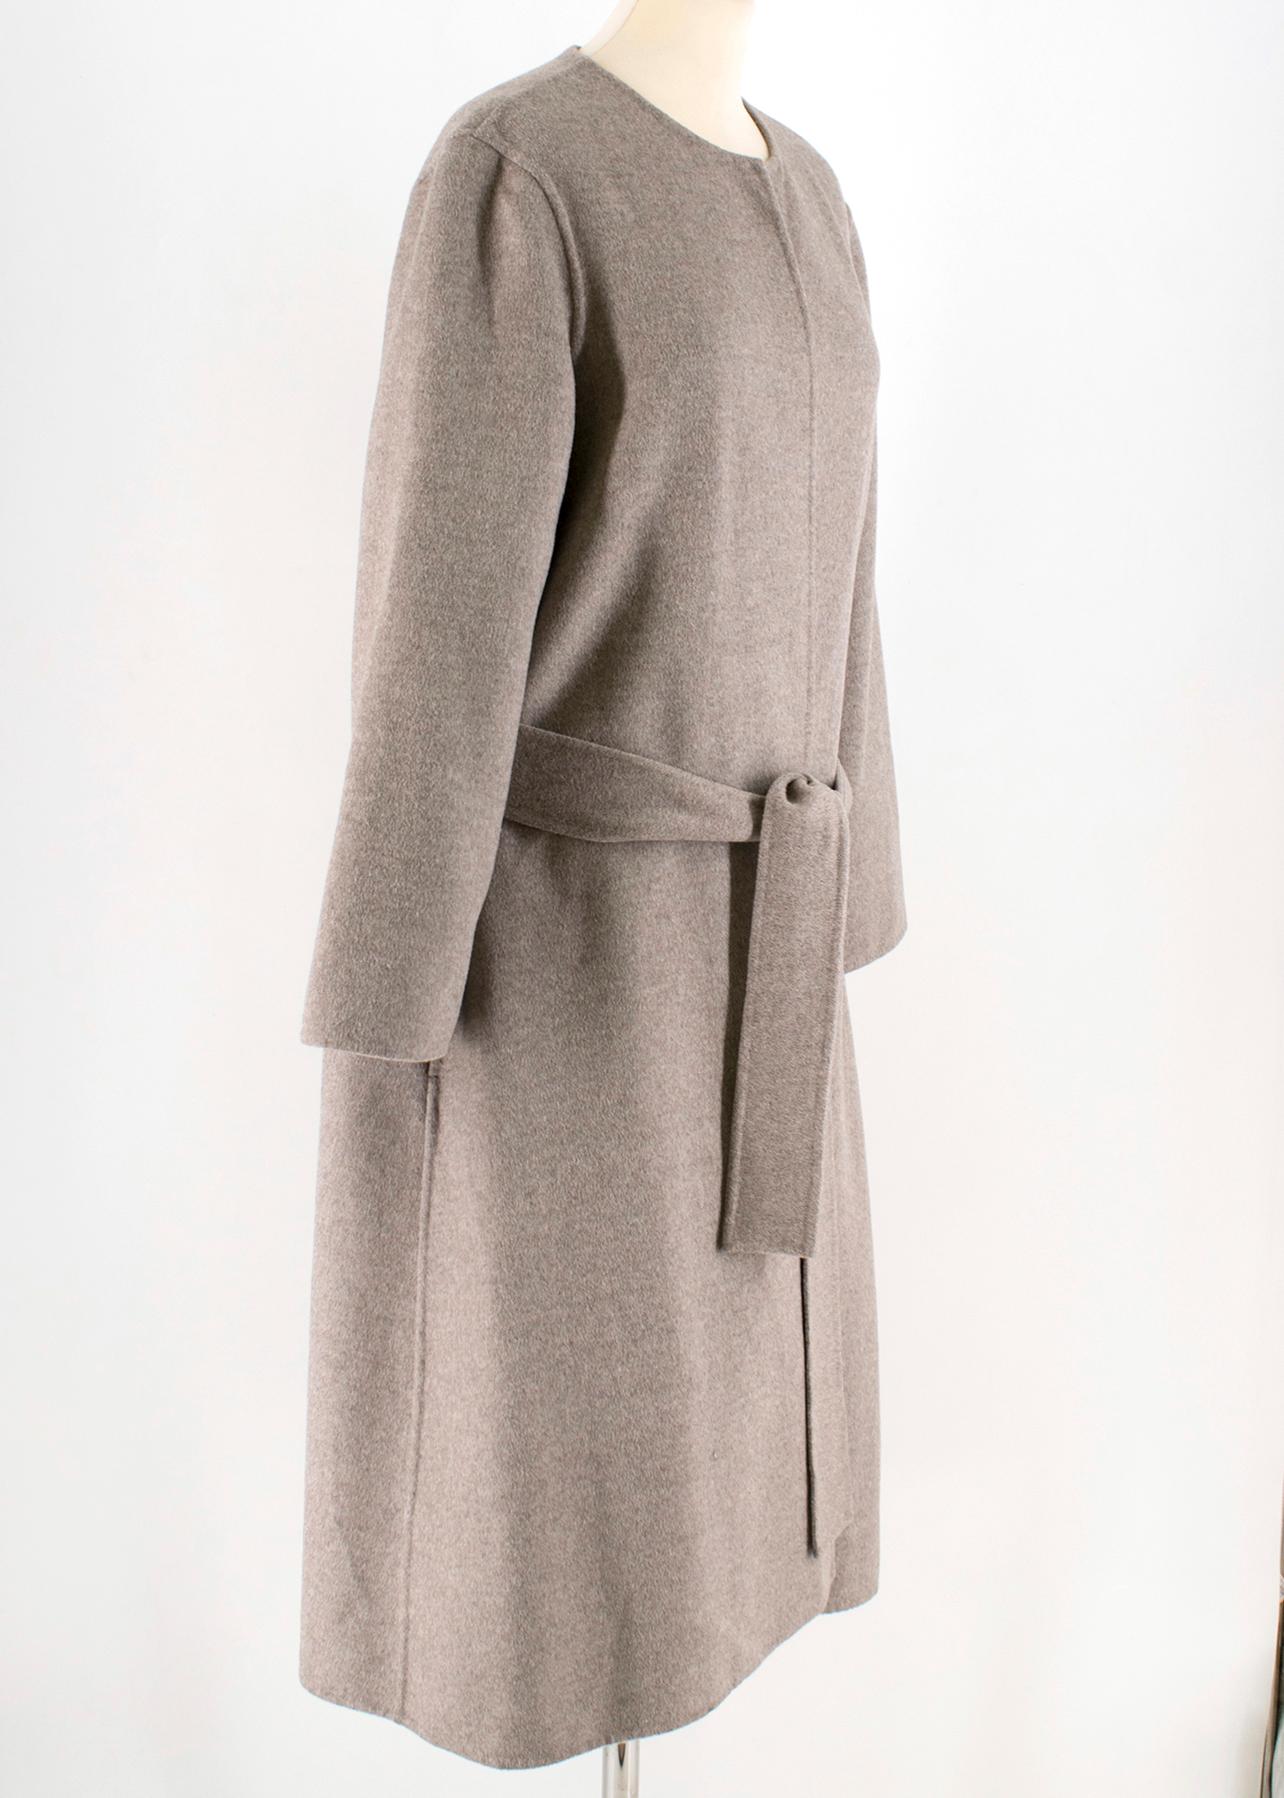 Joseph Taupe Wool blend Coat

- taupe wool blend coat 
- unlined
- belt fastened from the back inside
- round neckline

Please note, these items are pre-owned and may show some signs of storage, even when unworn and unused. This is reflected within